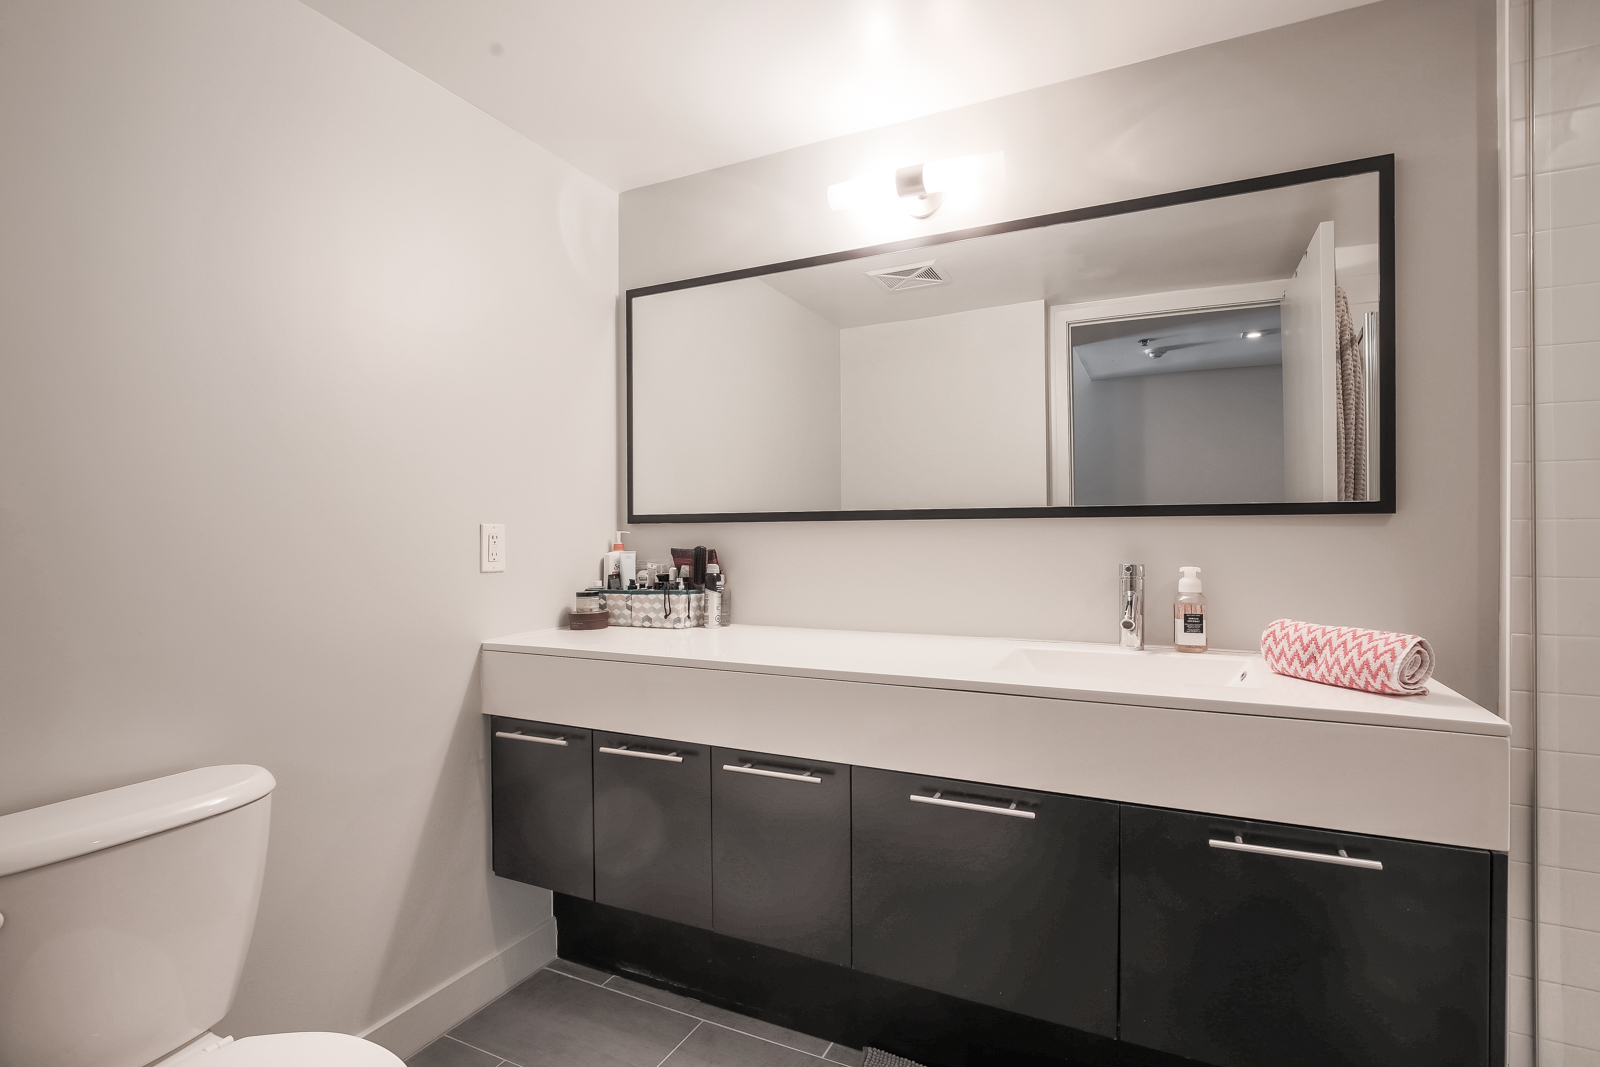 Photo showing 1 of the condo's 2 large bathrooms. This one has a wide, gorgeous mirror and clean lines